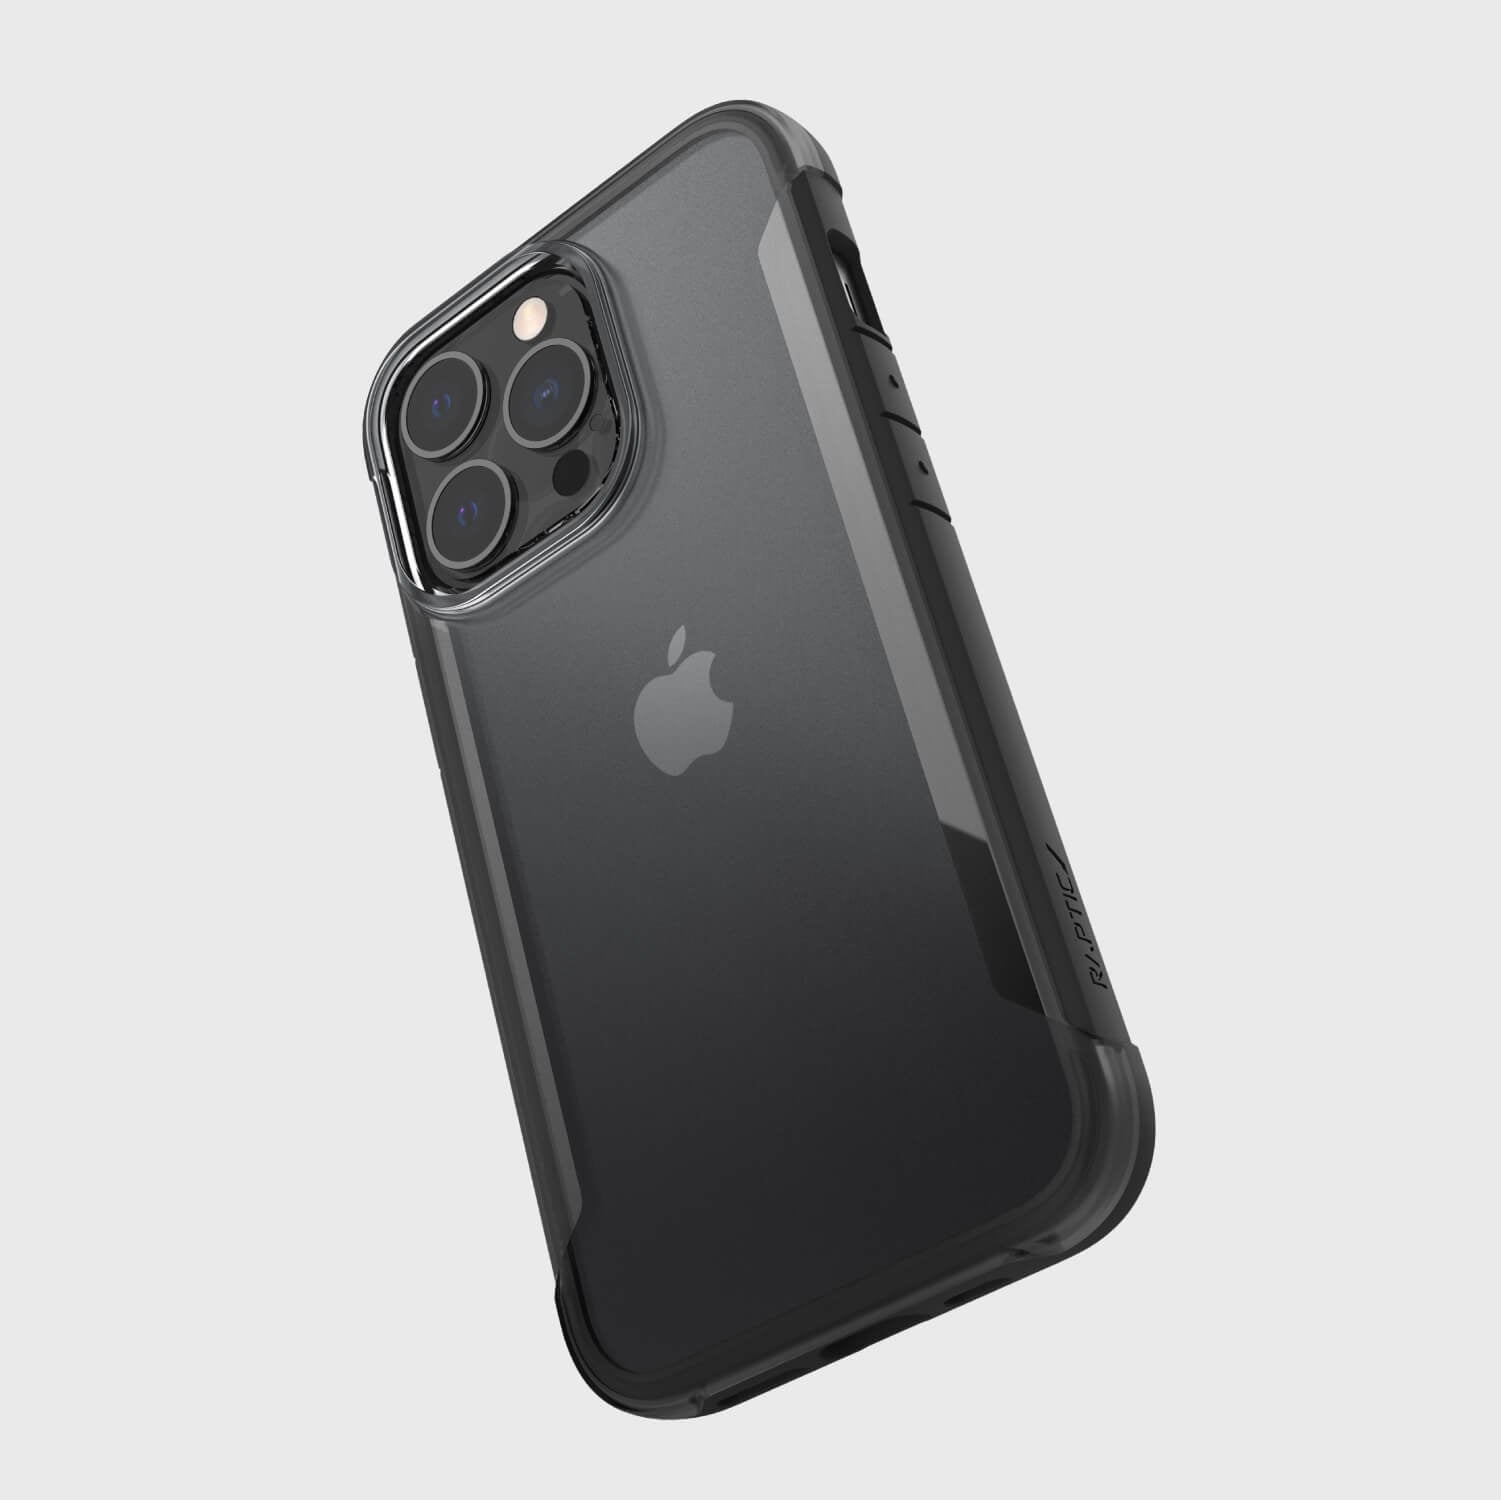 The eco-friendly iPhone 13 Pro case - TERRAIN by Raptic is shown in black.